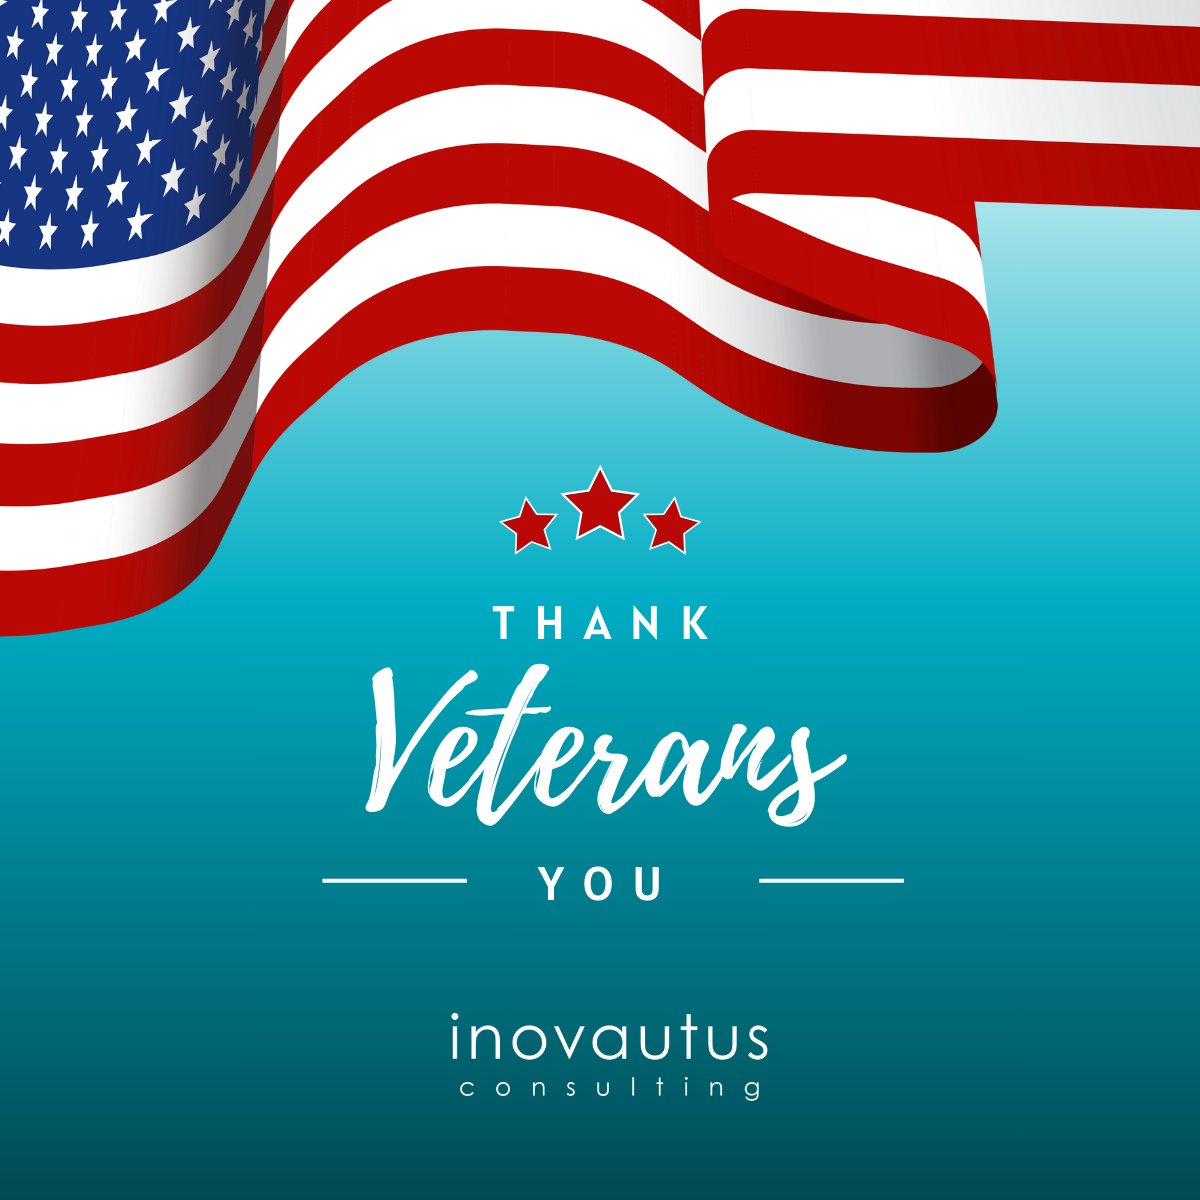 Today, we pause to honor and express our deepest gratitude to all those who have served. 🎖️ Veterans Day is a day to acknowledge and appreciate the unwavering bravery and sacrifices made by our veterans. #VeteransDay #Gratitude #ThankYou